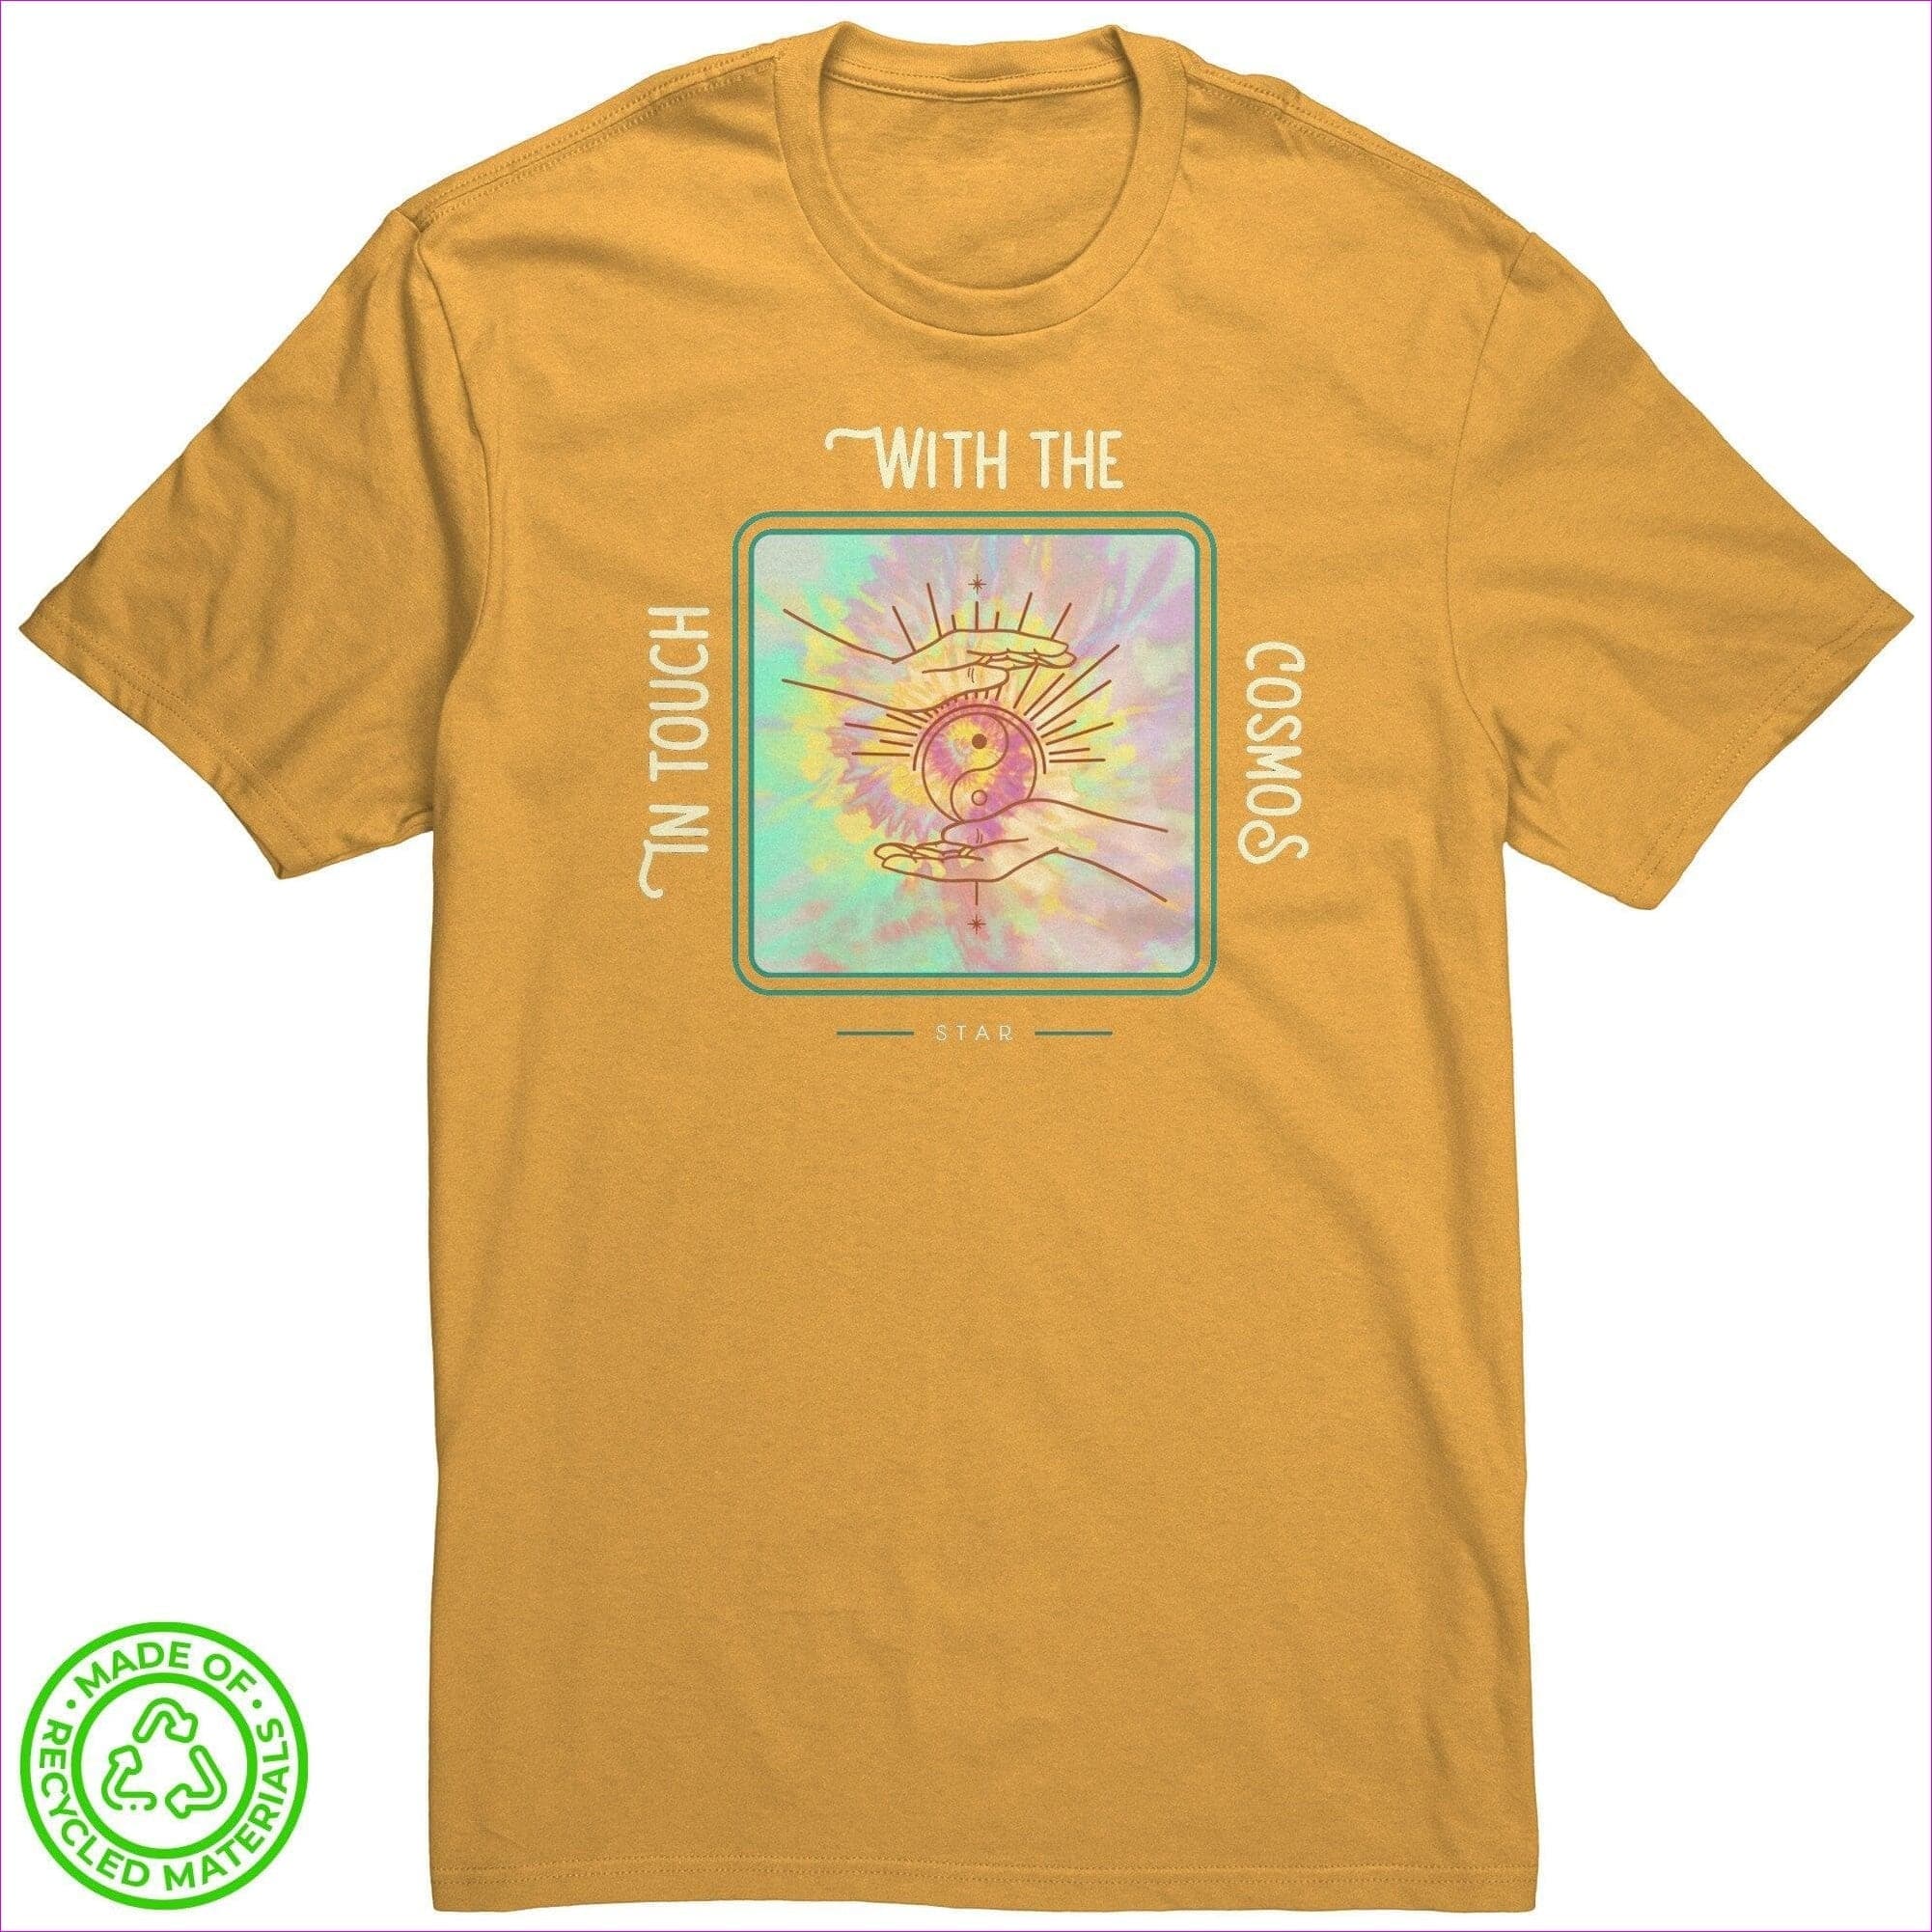 Maize Yellow - In Touch Recycled Fabric Unisex Tee - Unisex T-Shirt at TFC&H Co.